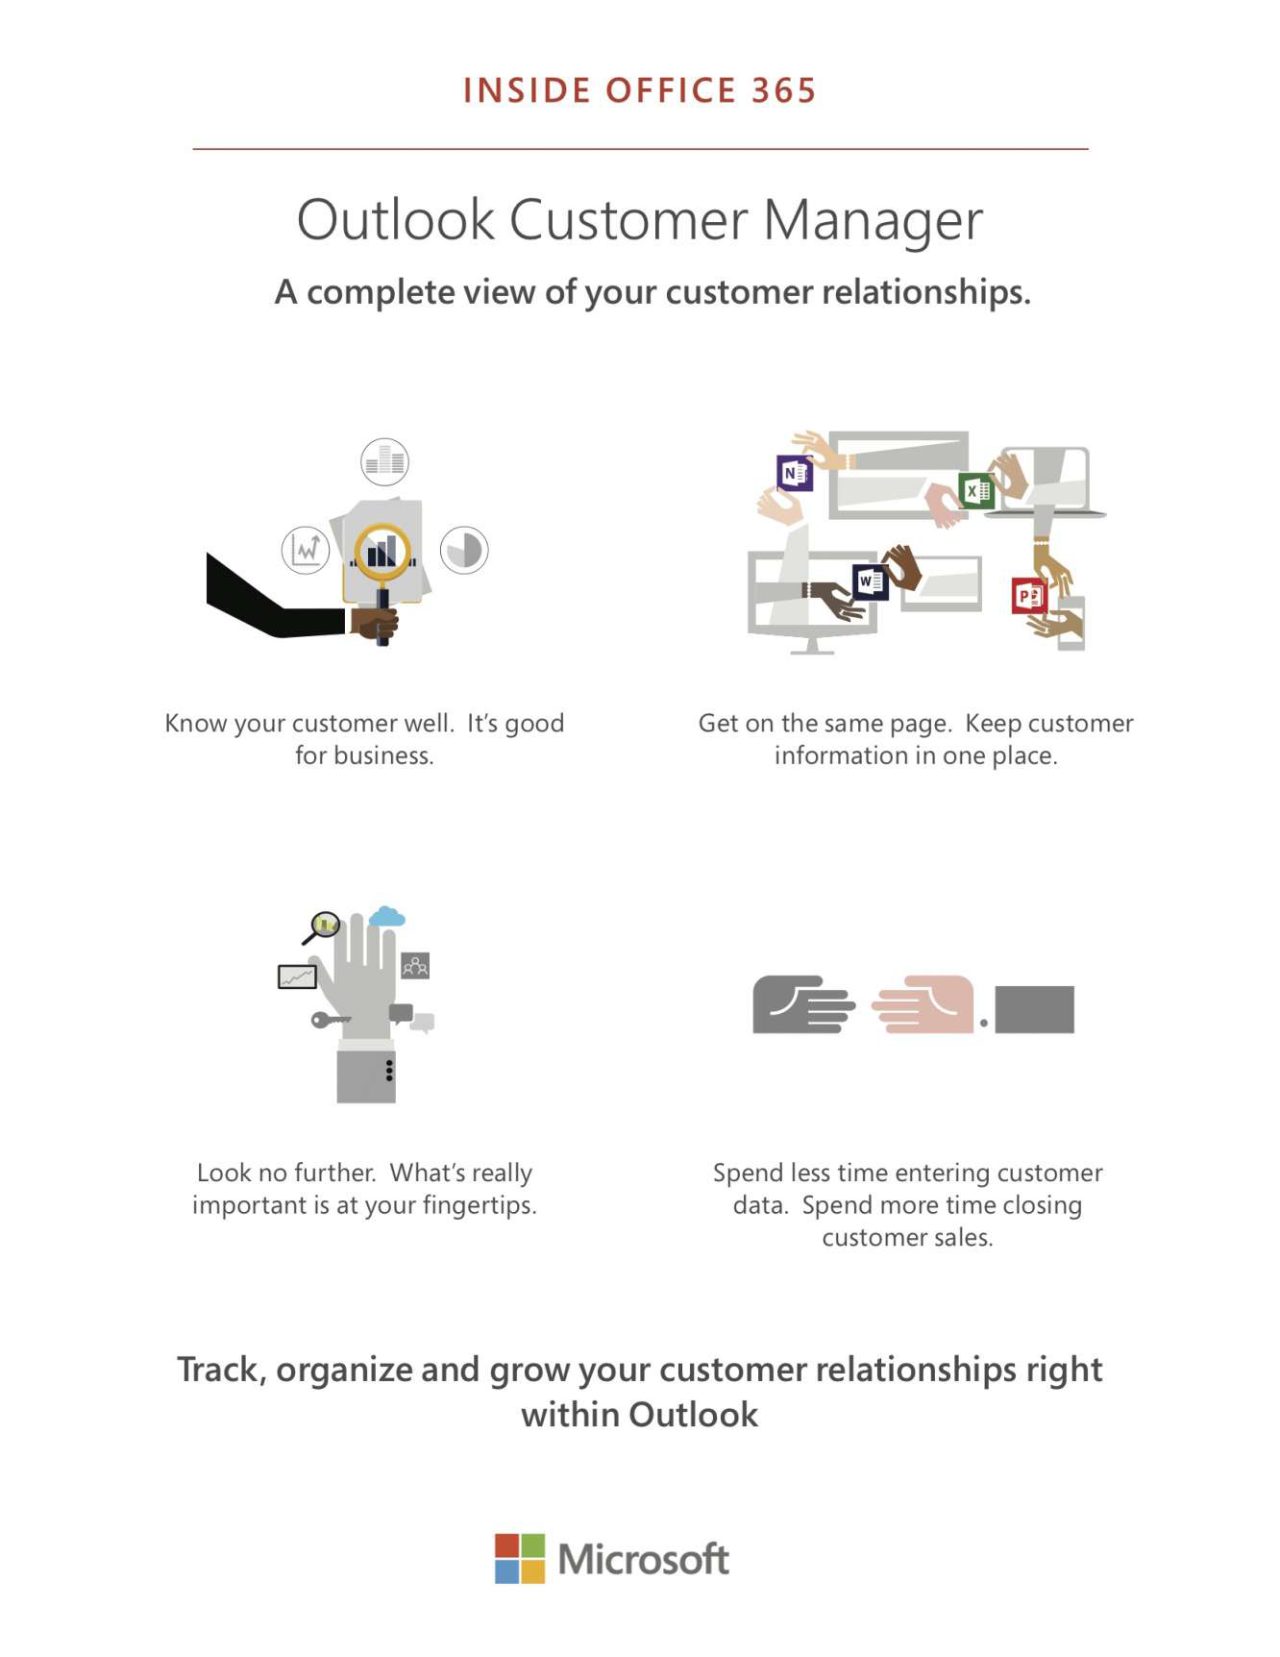 Outlook Customer Manager – A complete view of your customer relationships